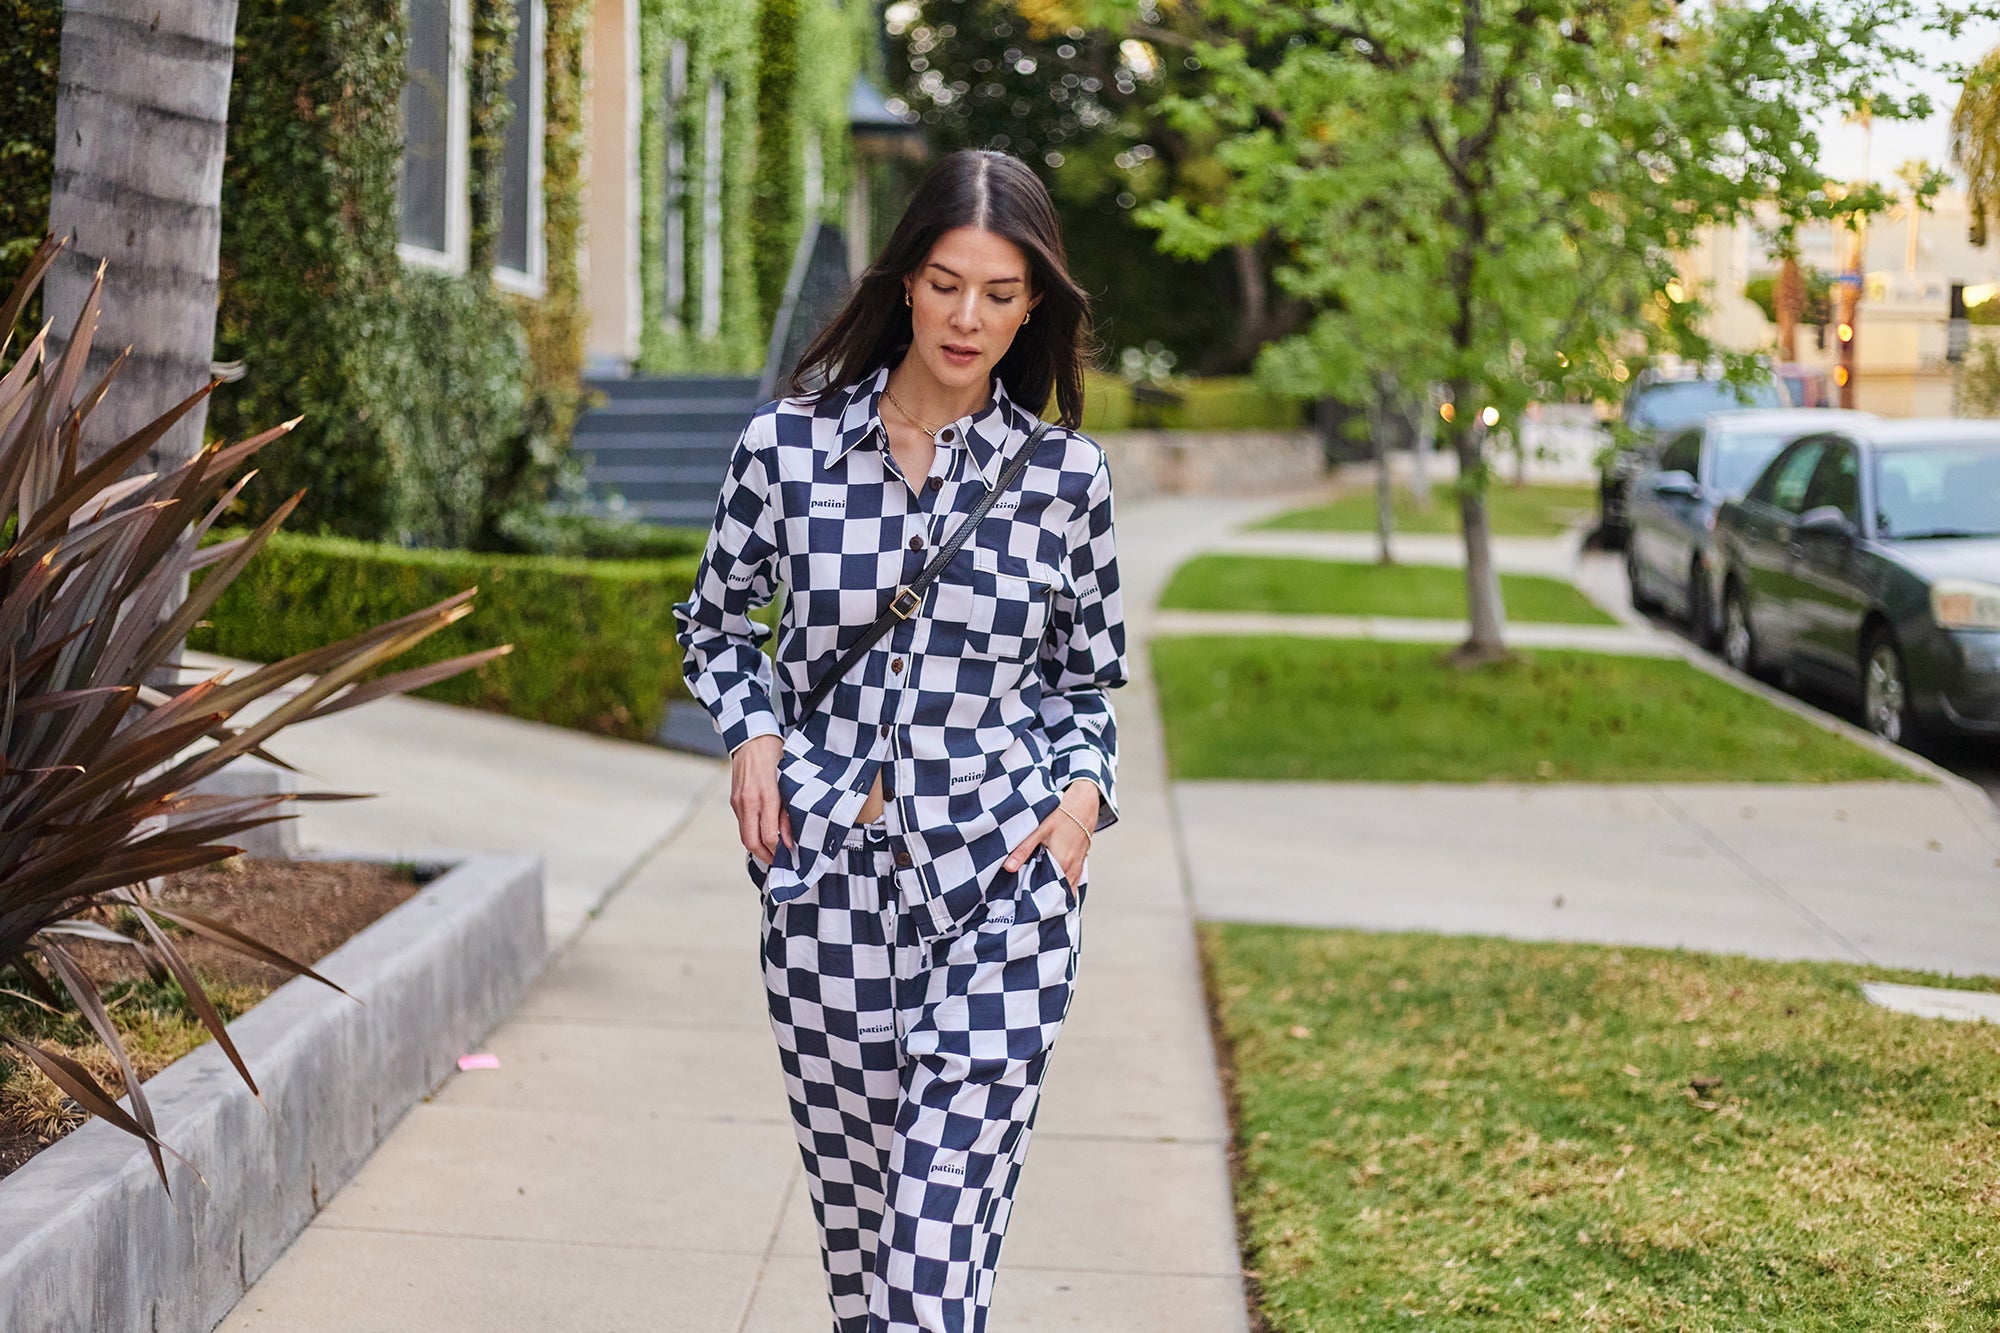 Black and white checkered long-sleeve pajama set with white piping.